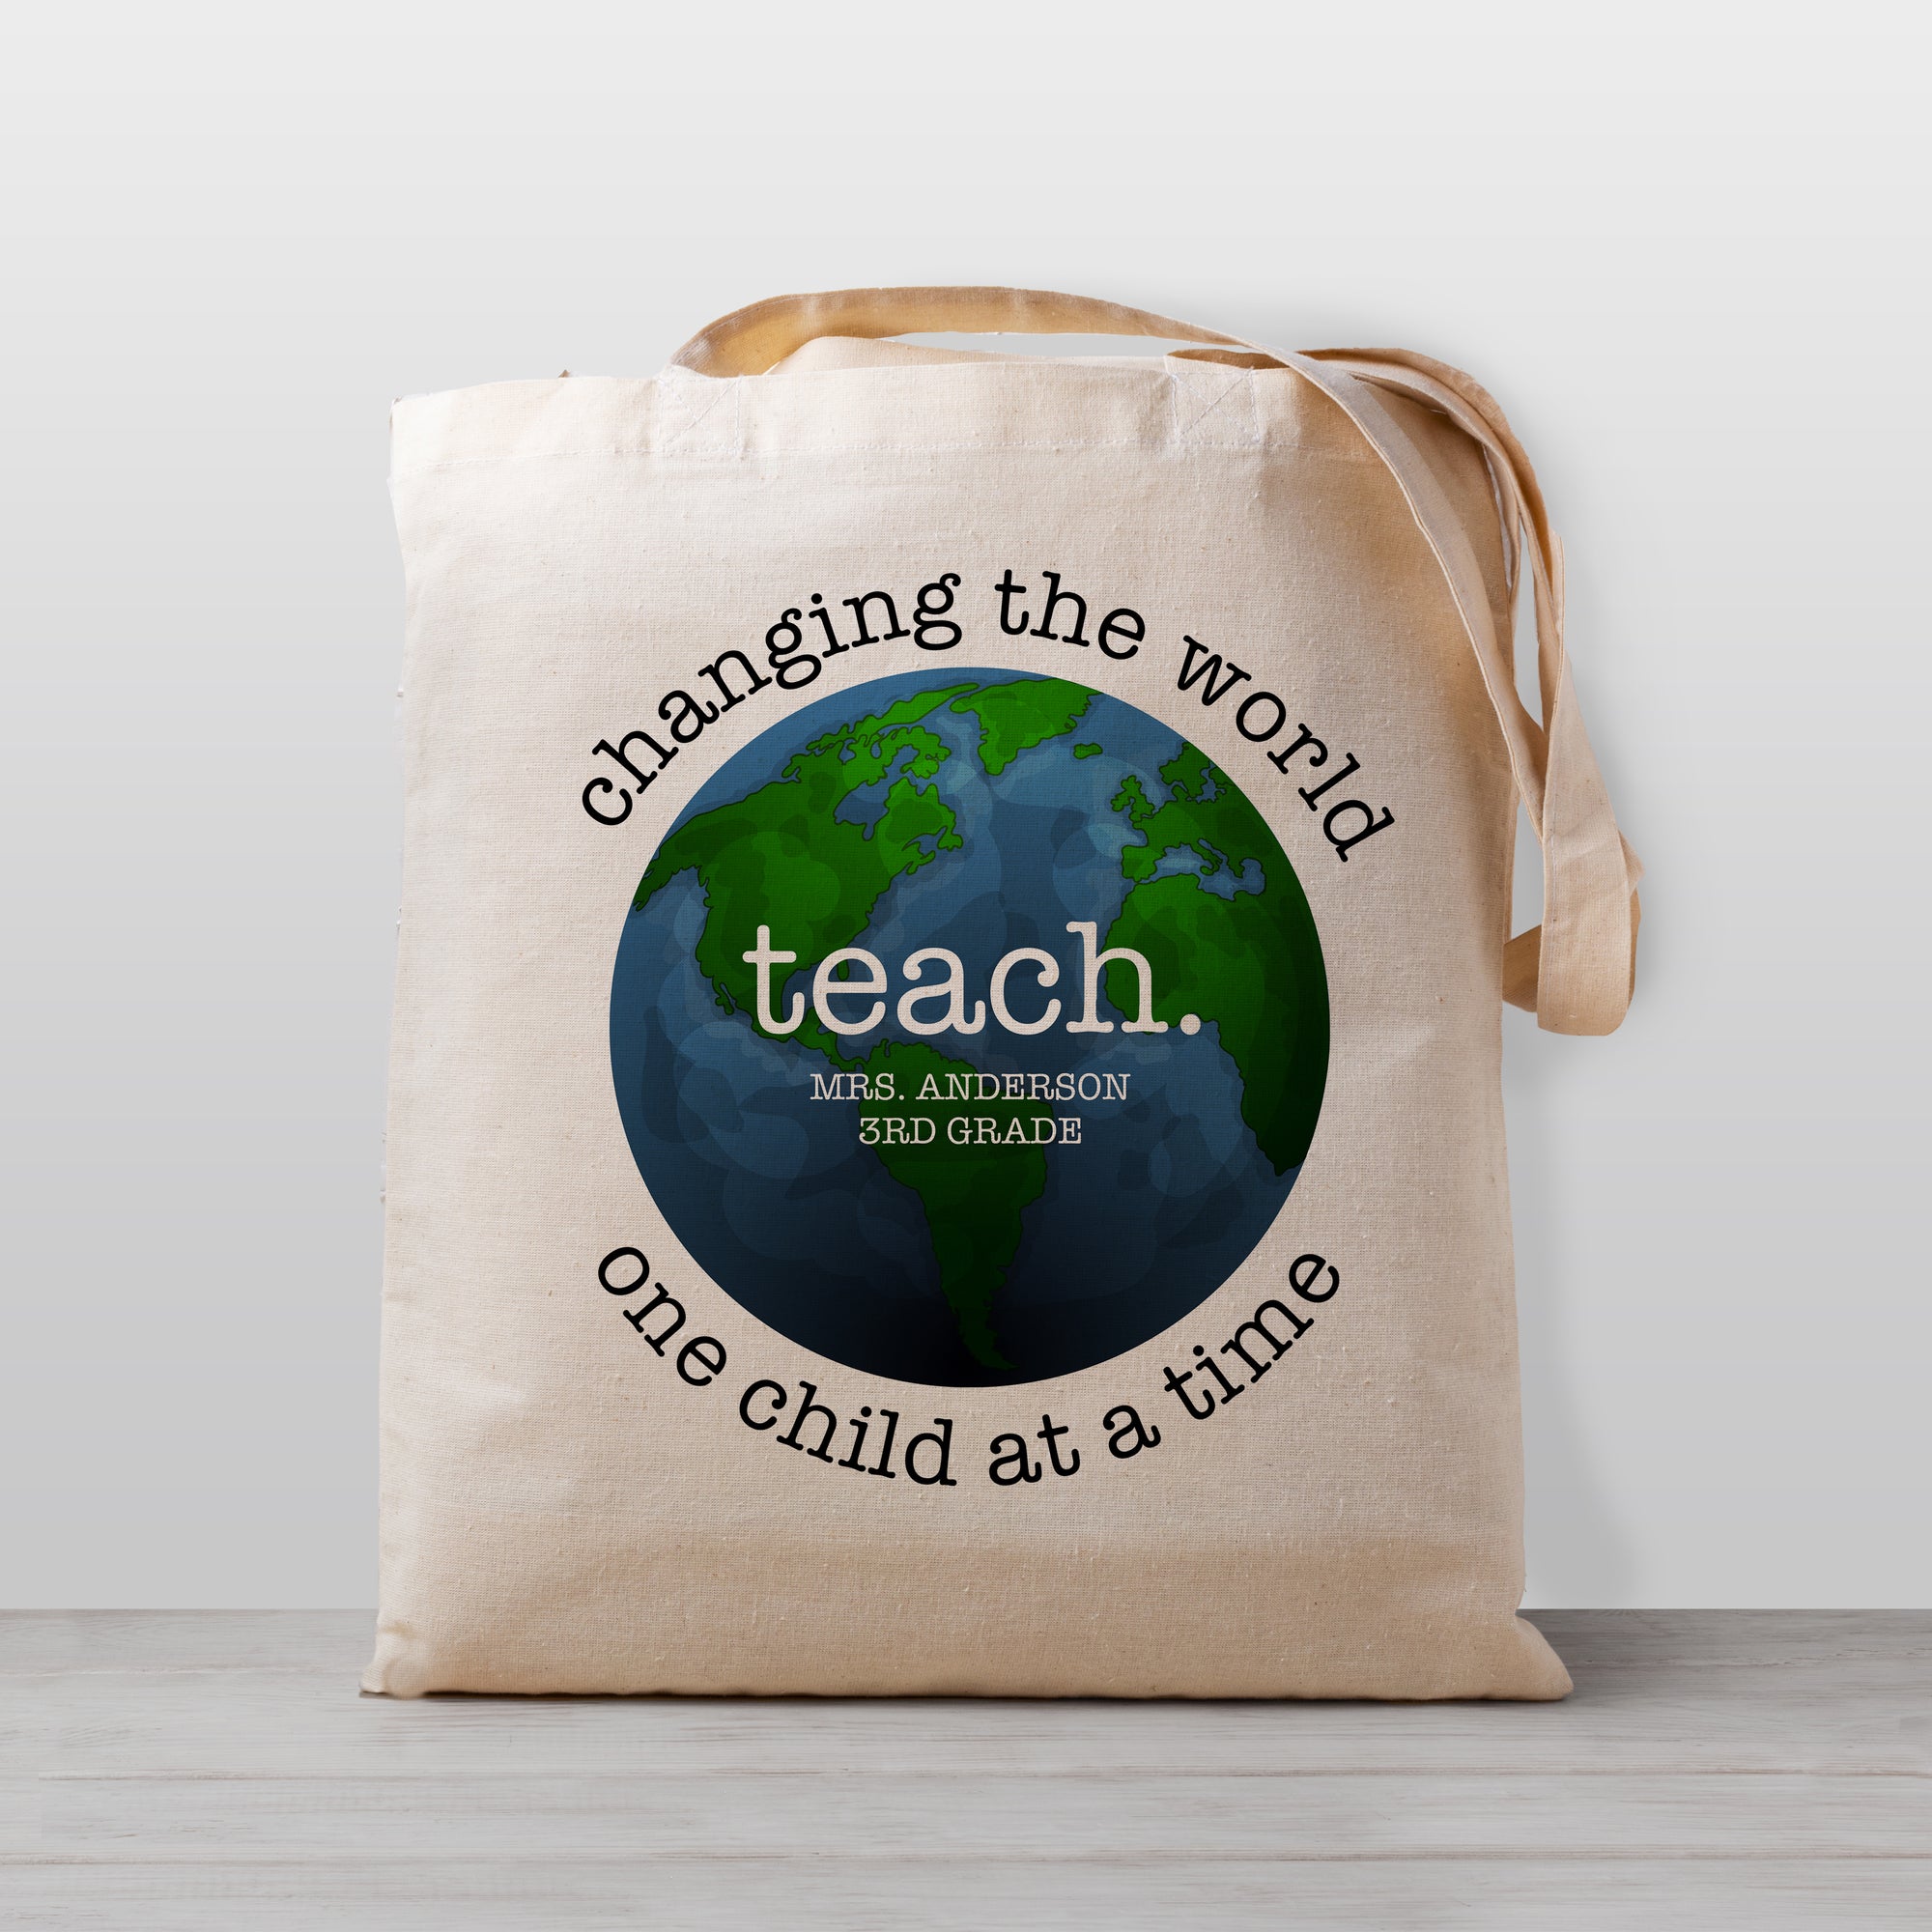 Teacher Gift, Personalized Tote Bag, Changing the World One Child at a Time, 100% Natural Cotton Canvas